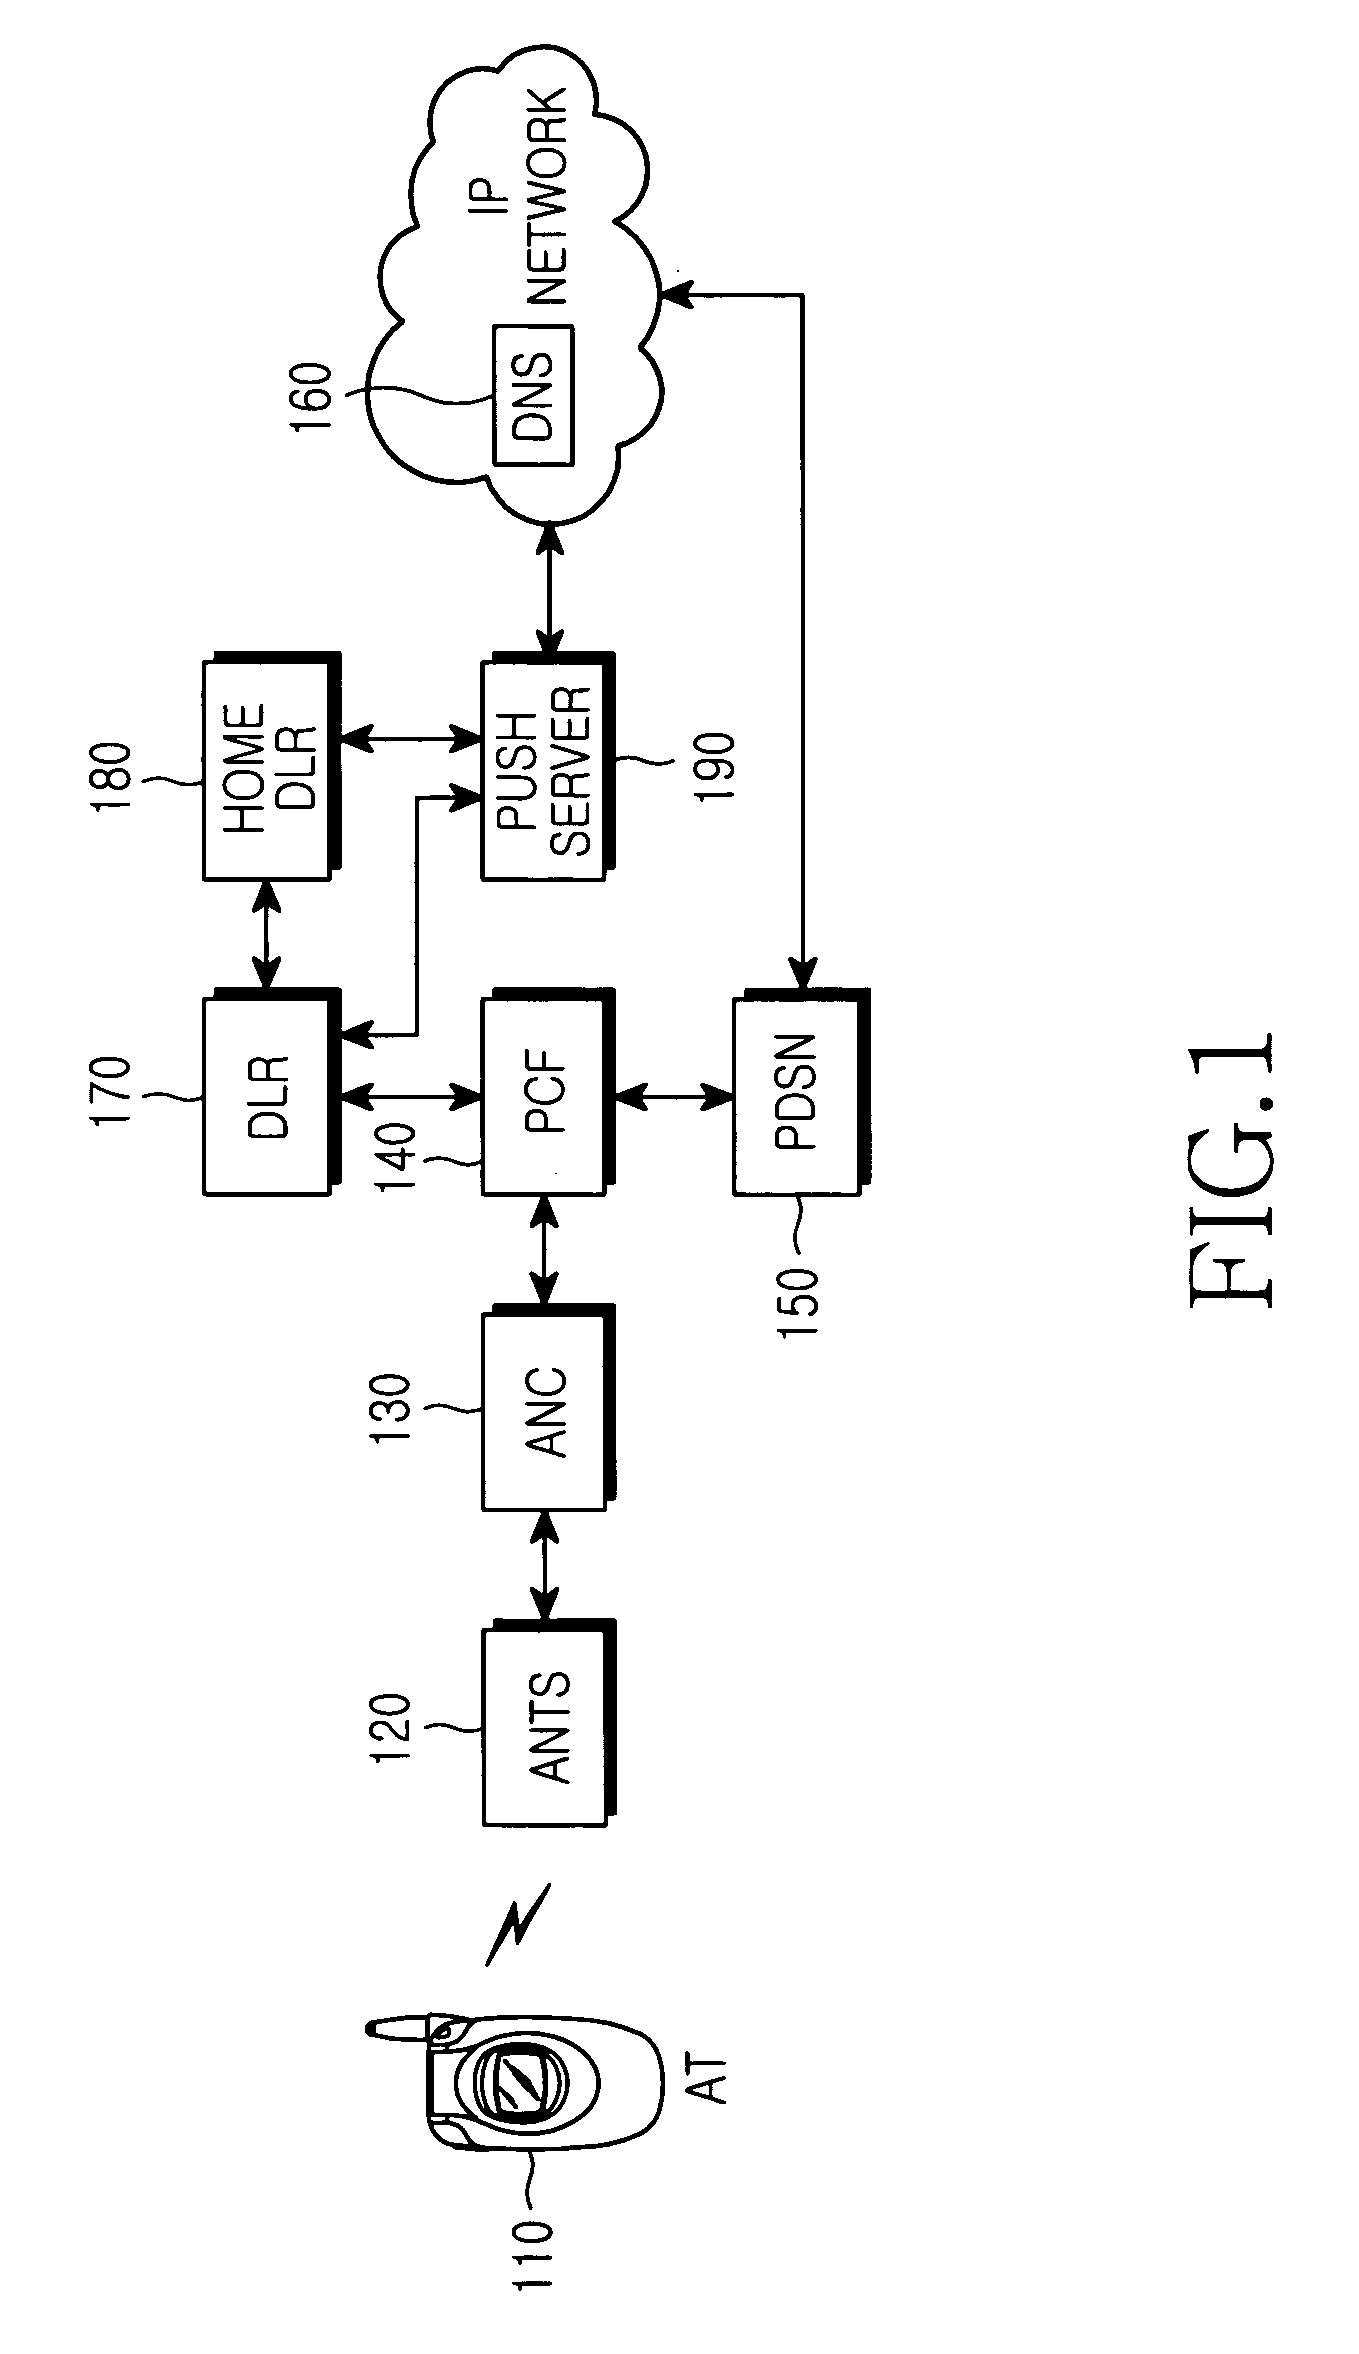 Method of providing push service to mobile terminal in a mobile communication system for high-speed data transmission and push server apparatus using the same